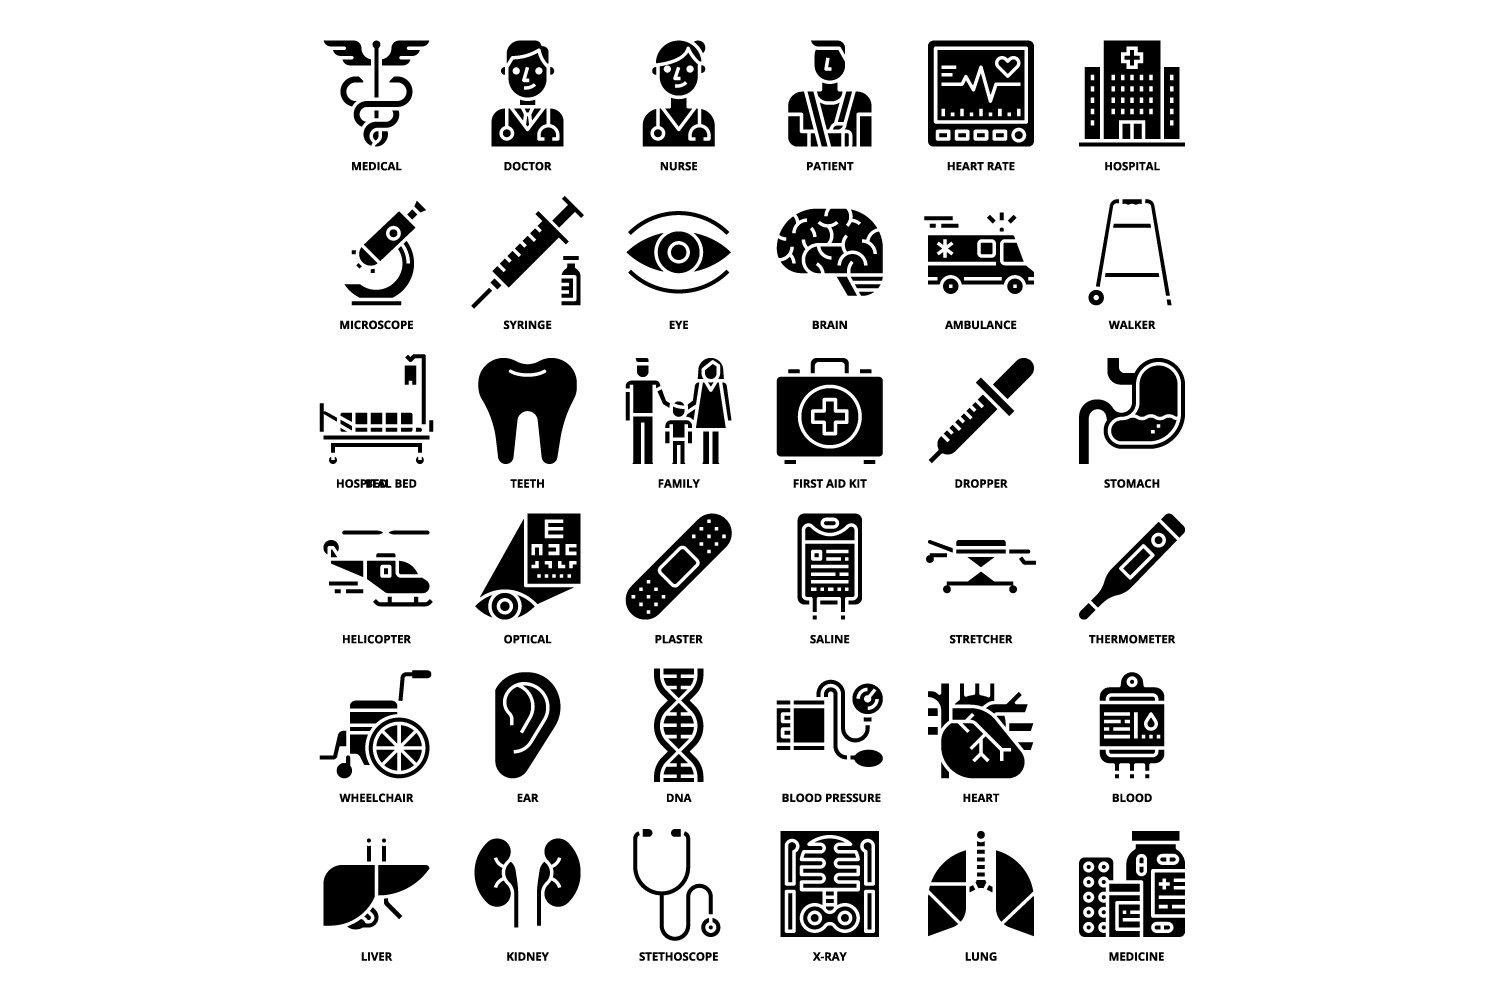 Black and white image of medical icons.